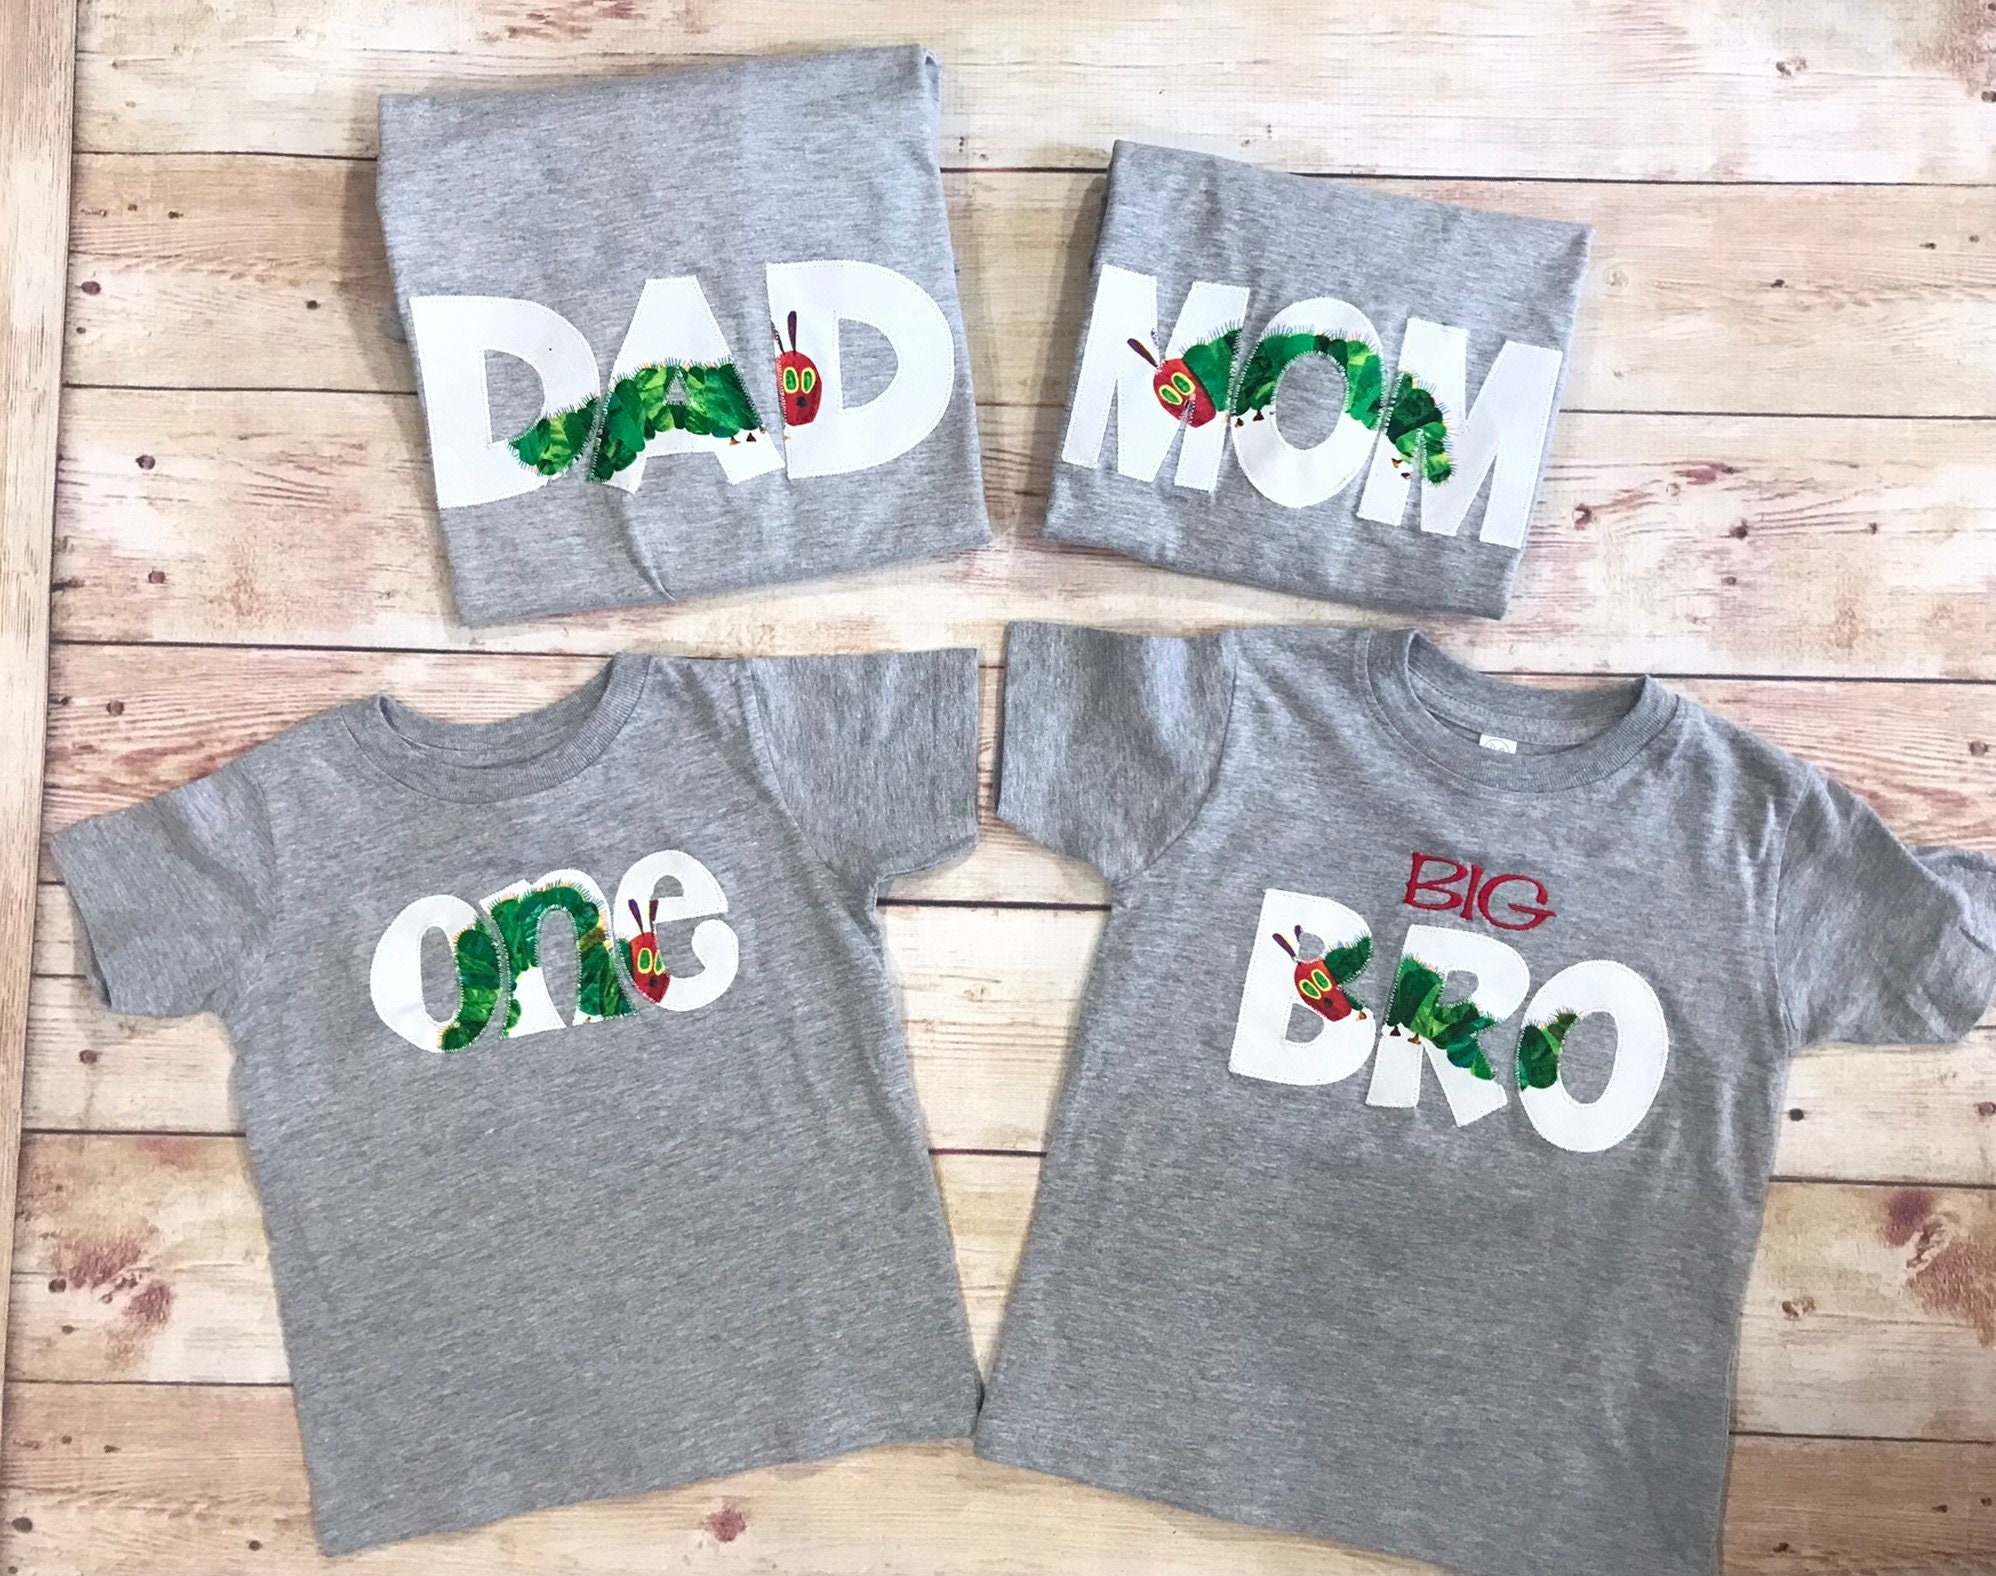 Kleding Unisex kinderkleding Tops & T-shirts T-shirts T-shirts met print Very Hungry Caterpillar Birthday Shirt First Birthday Outfit with Leg Warmers Boys Cake Smash Birthday Outfit Bodysuit T Shirt Personalized 